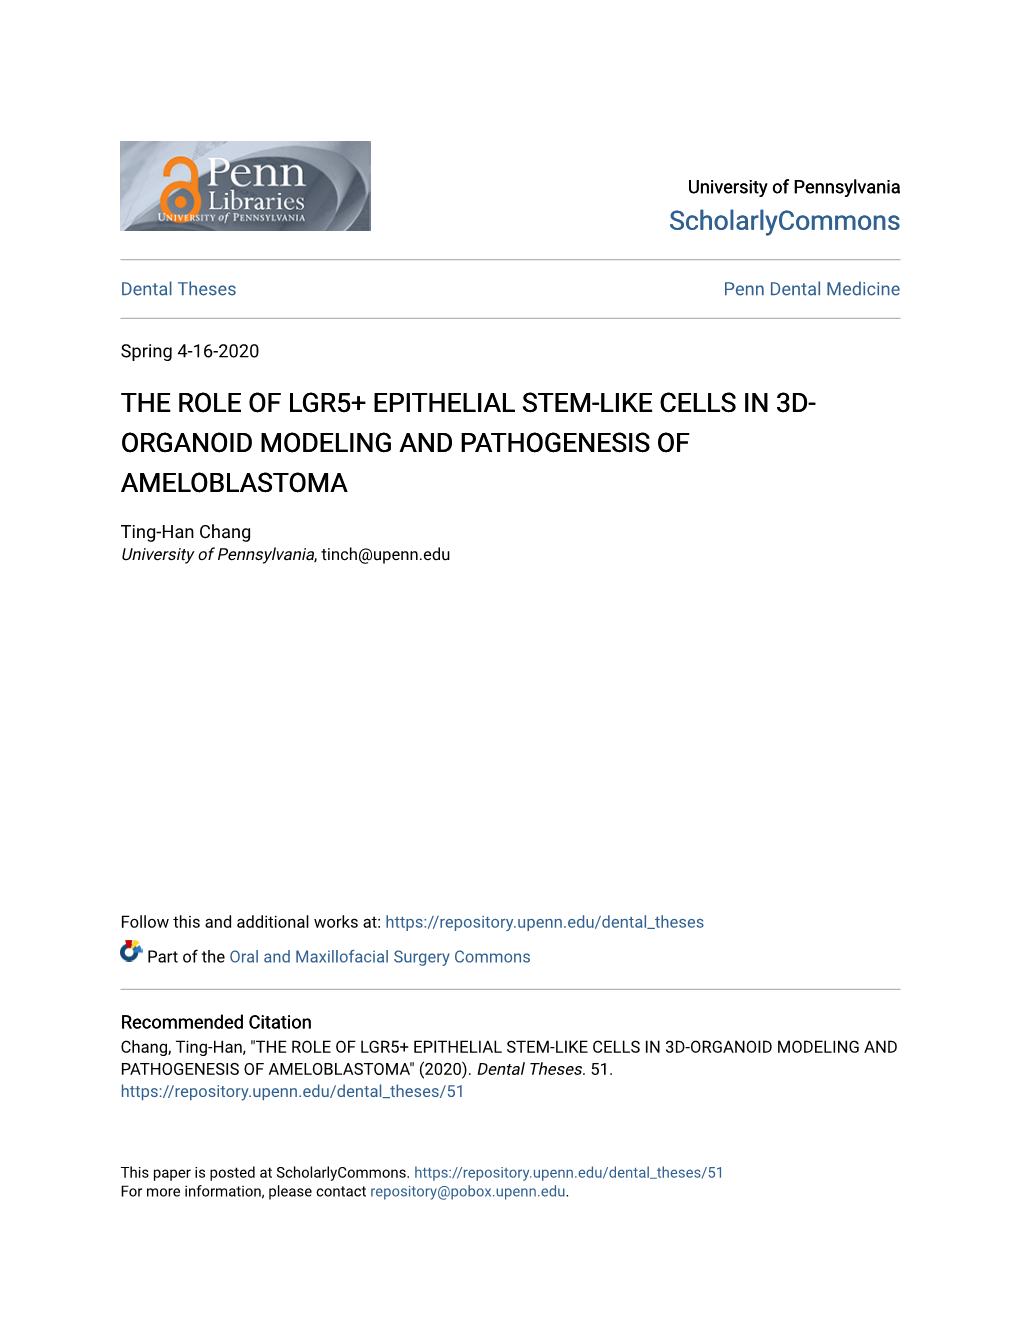 The Role of Lgr5+ Epithelial Stem-Like Cells in 3D-Organoid Modeling and Pathogenesis of Ameloblastoma" (2020)